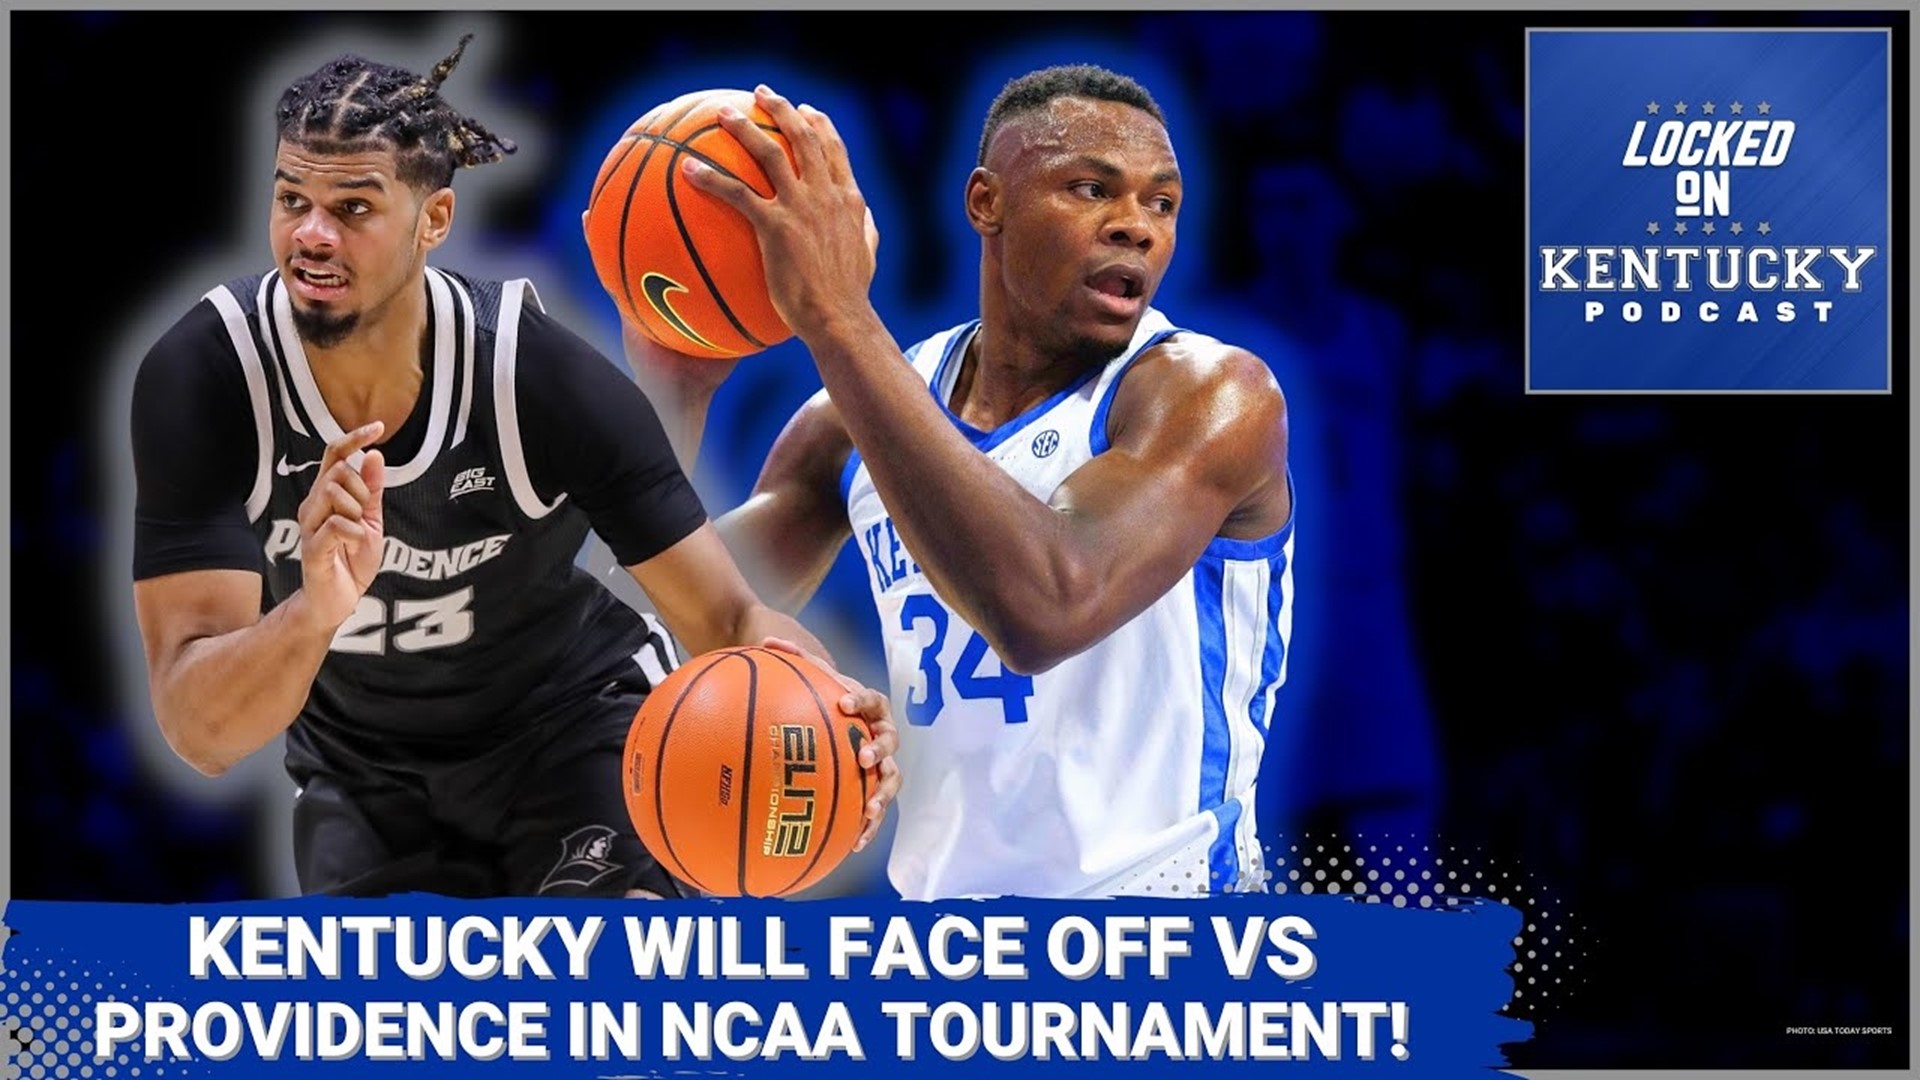 Kentucky basketball has earned an interesting draw in the NCAA tournament.